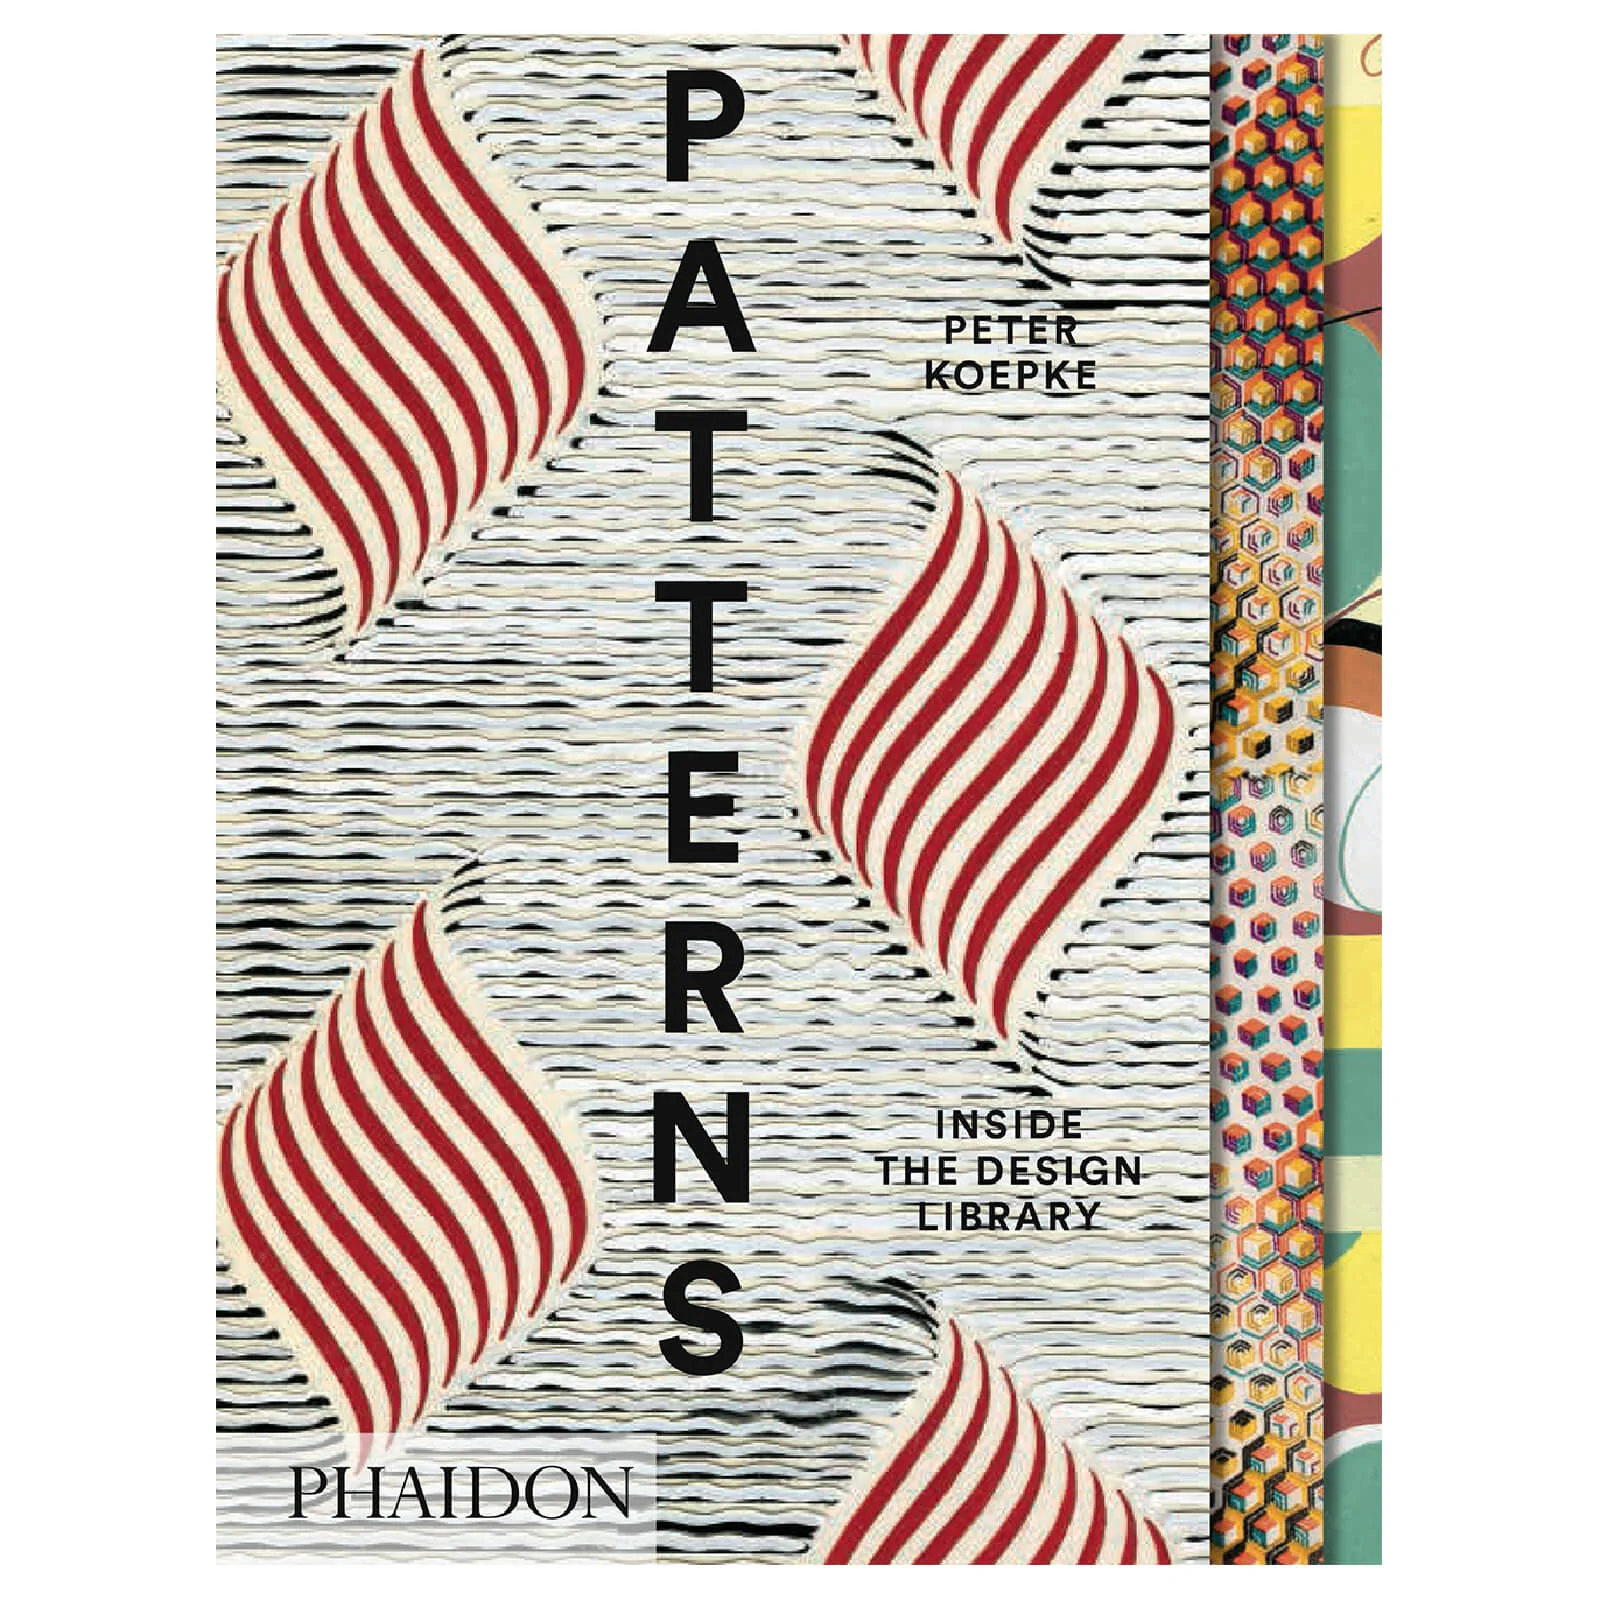 Phaidon Books: Patterns: Inside the Design Library Image 1